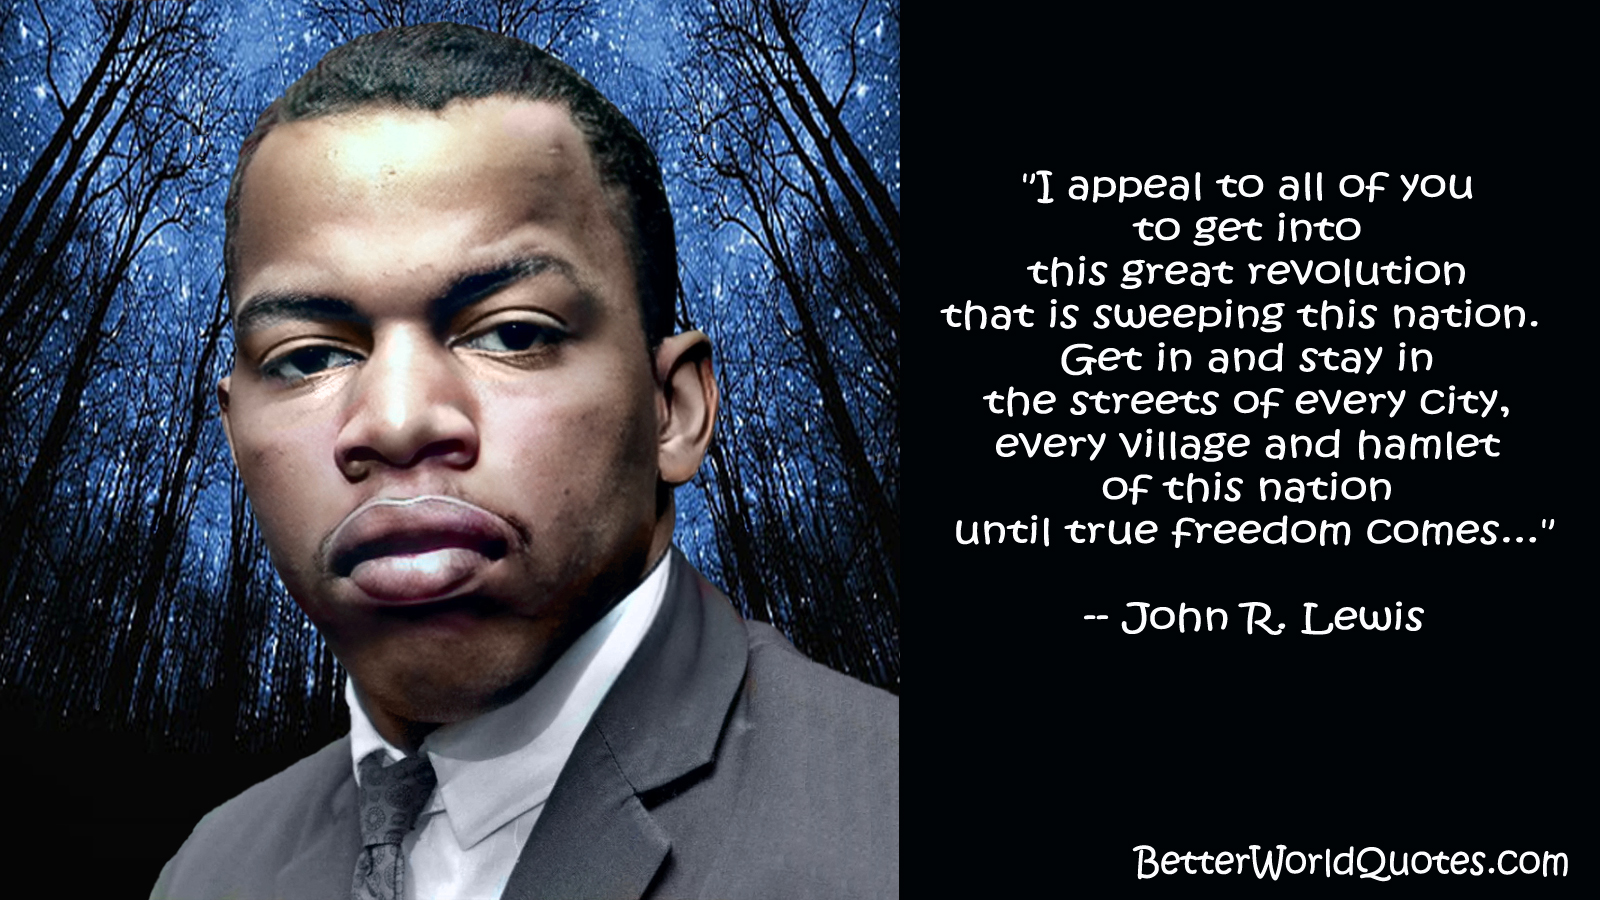 John R. Lewis: I appeal to all of you to get into this great revolution that is sweeping this nation.  Get in and stay in the streets of every city, every village and hamlet of this nation until true freedom comes...